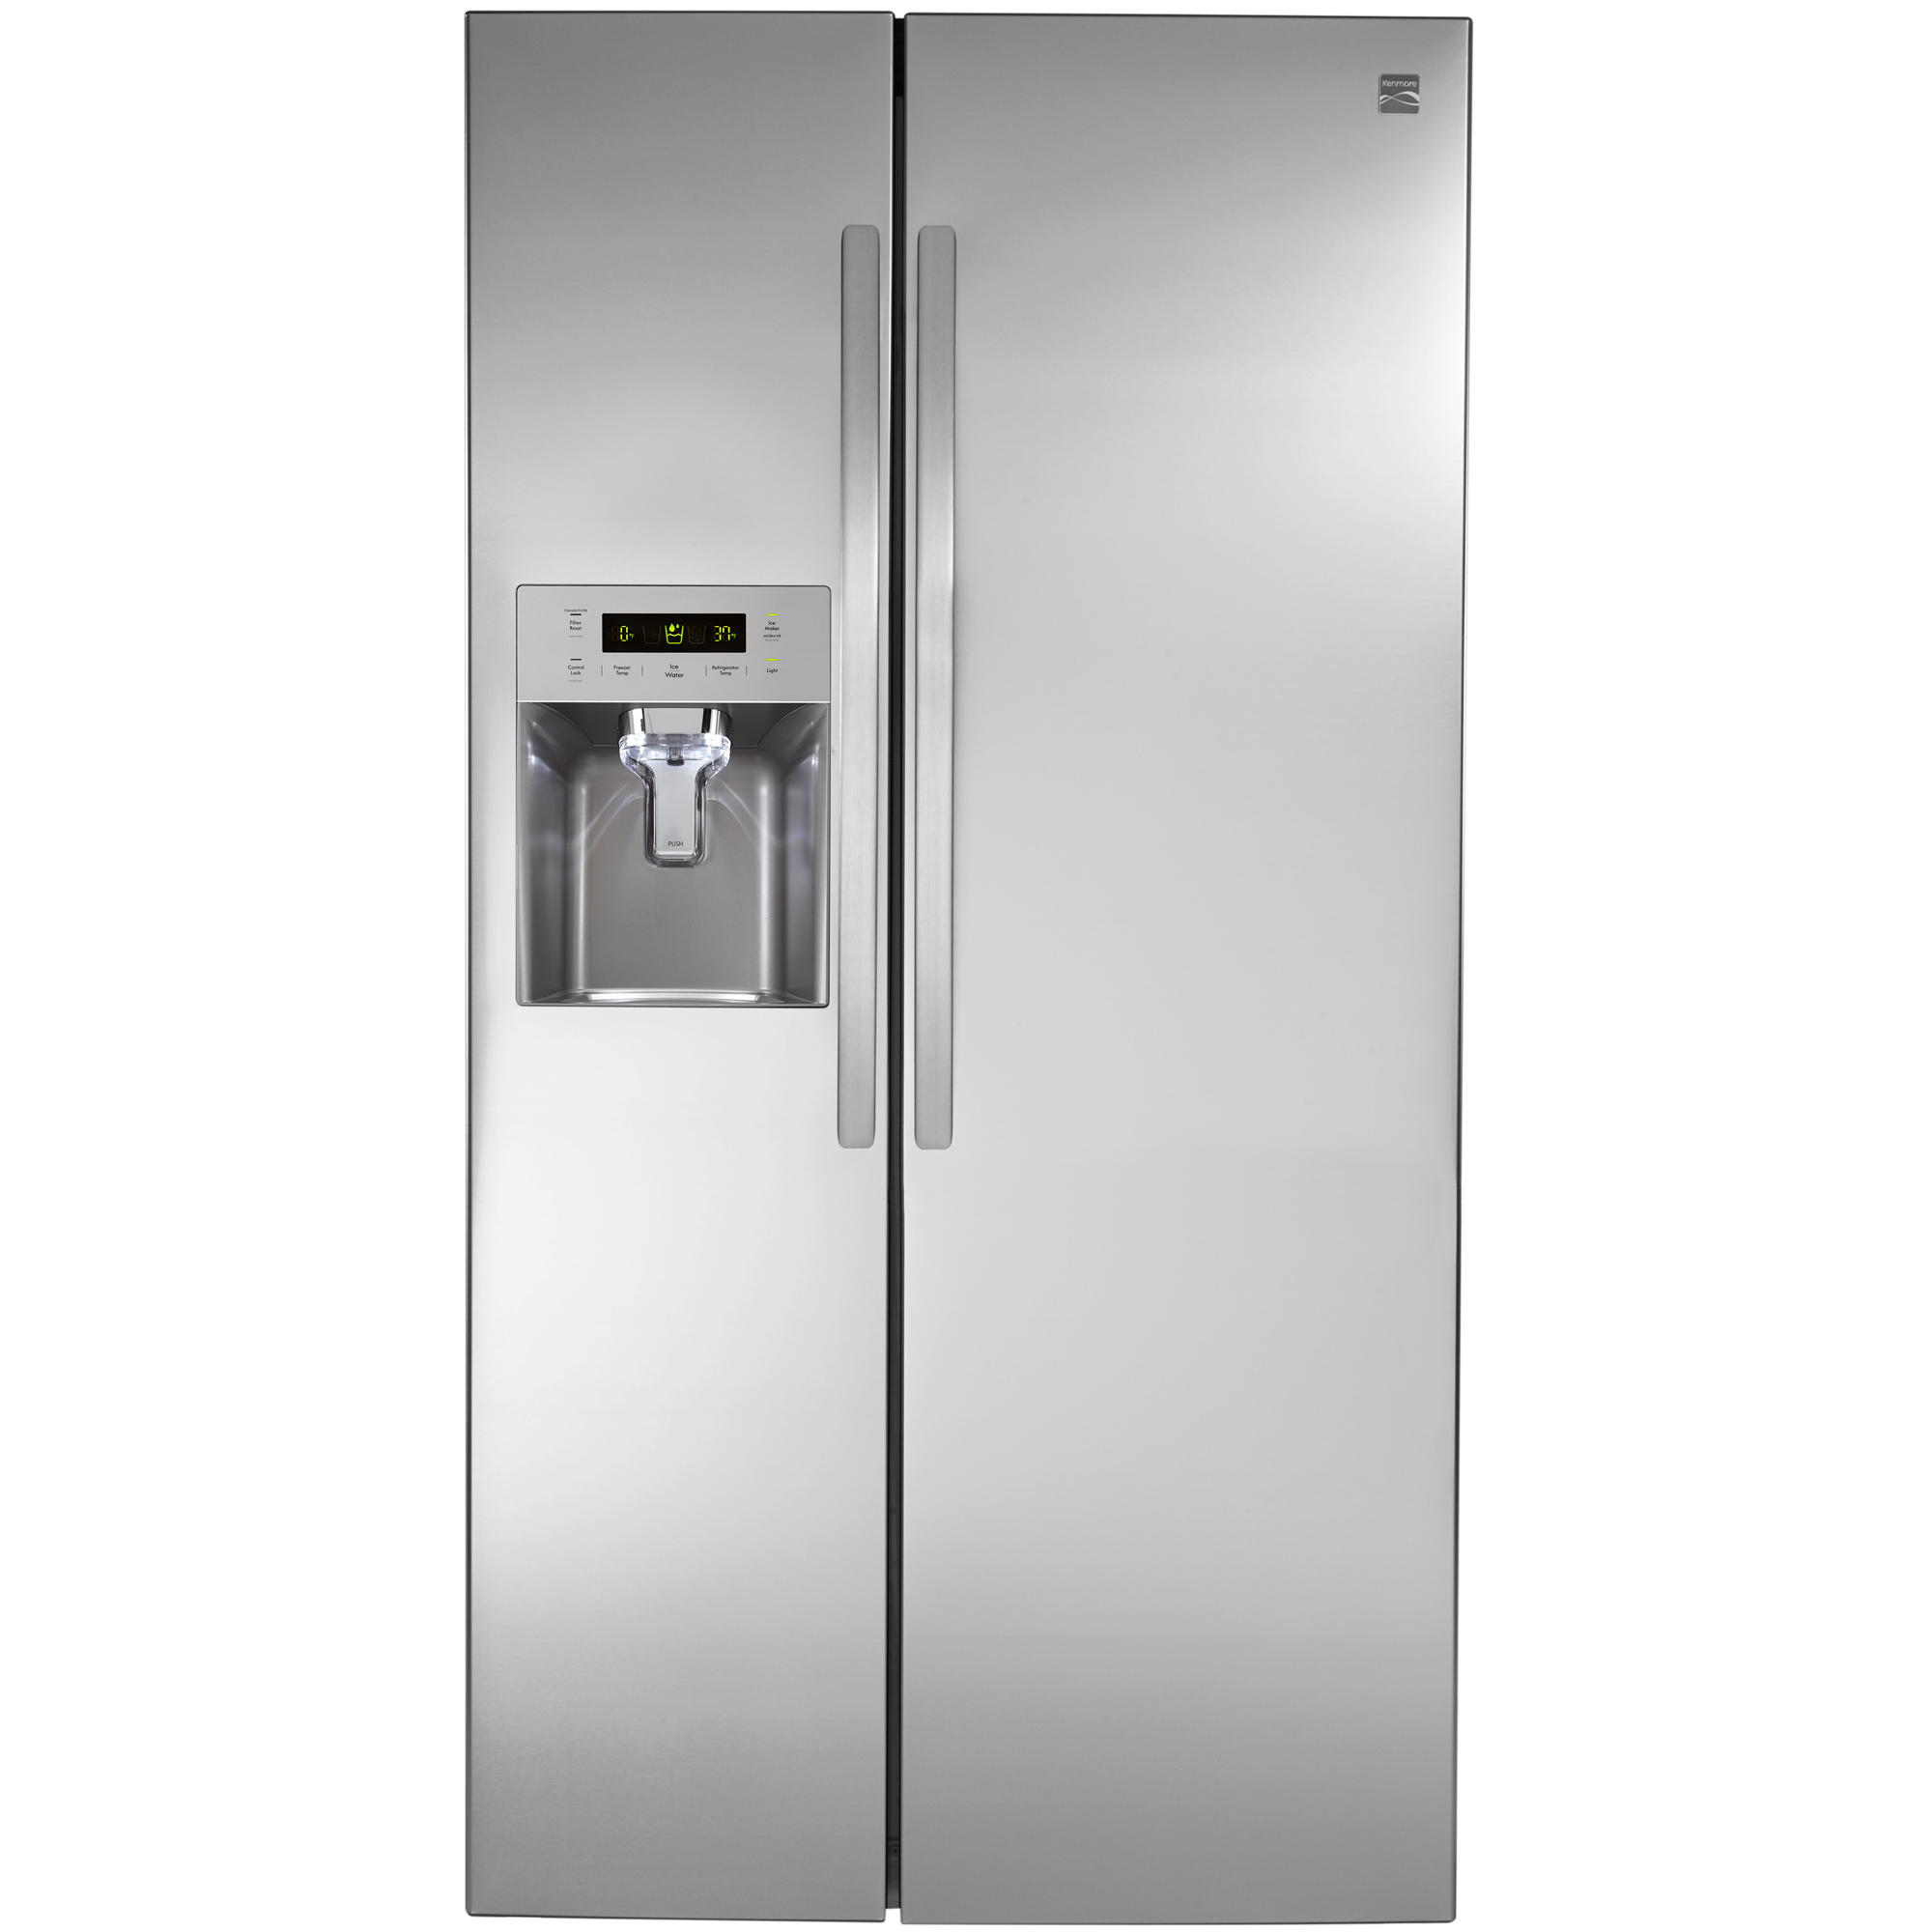 Kenmore 51733 26.2 cu. ft. Side-by-Side Refrigerator – Stainless Steel Kenmore Stainless Steel Refrigerator Side By Side